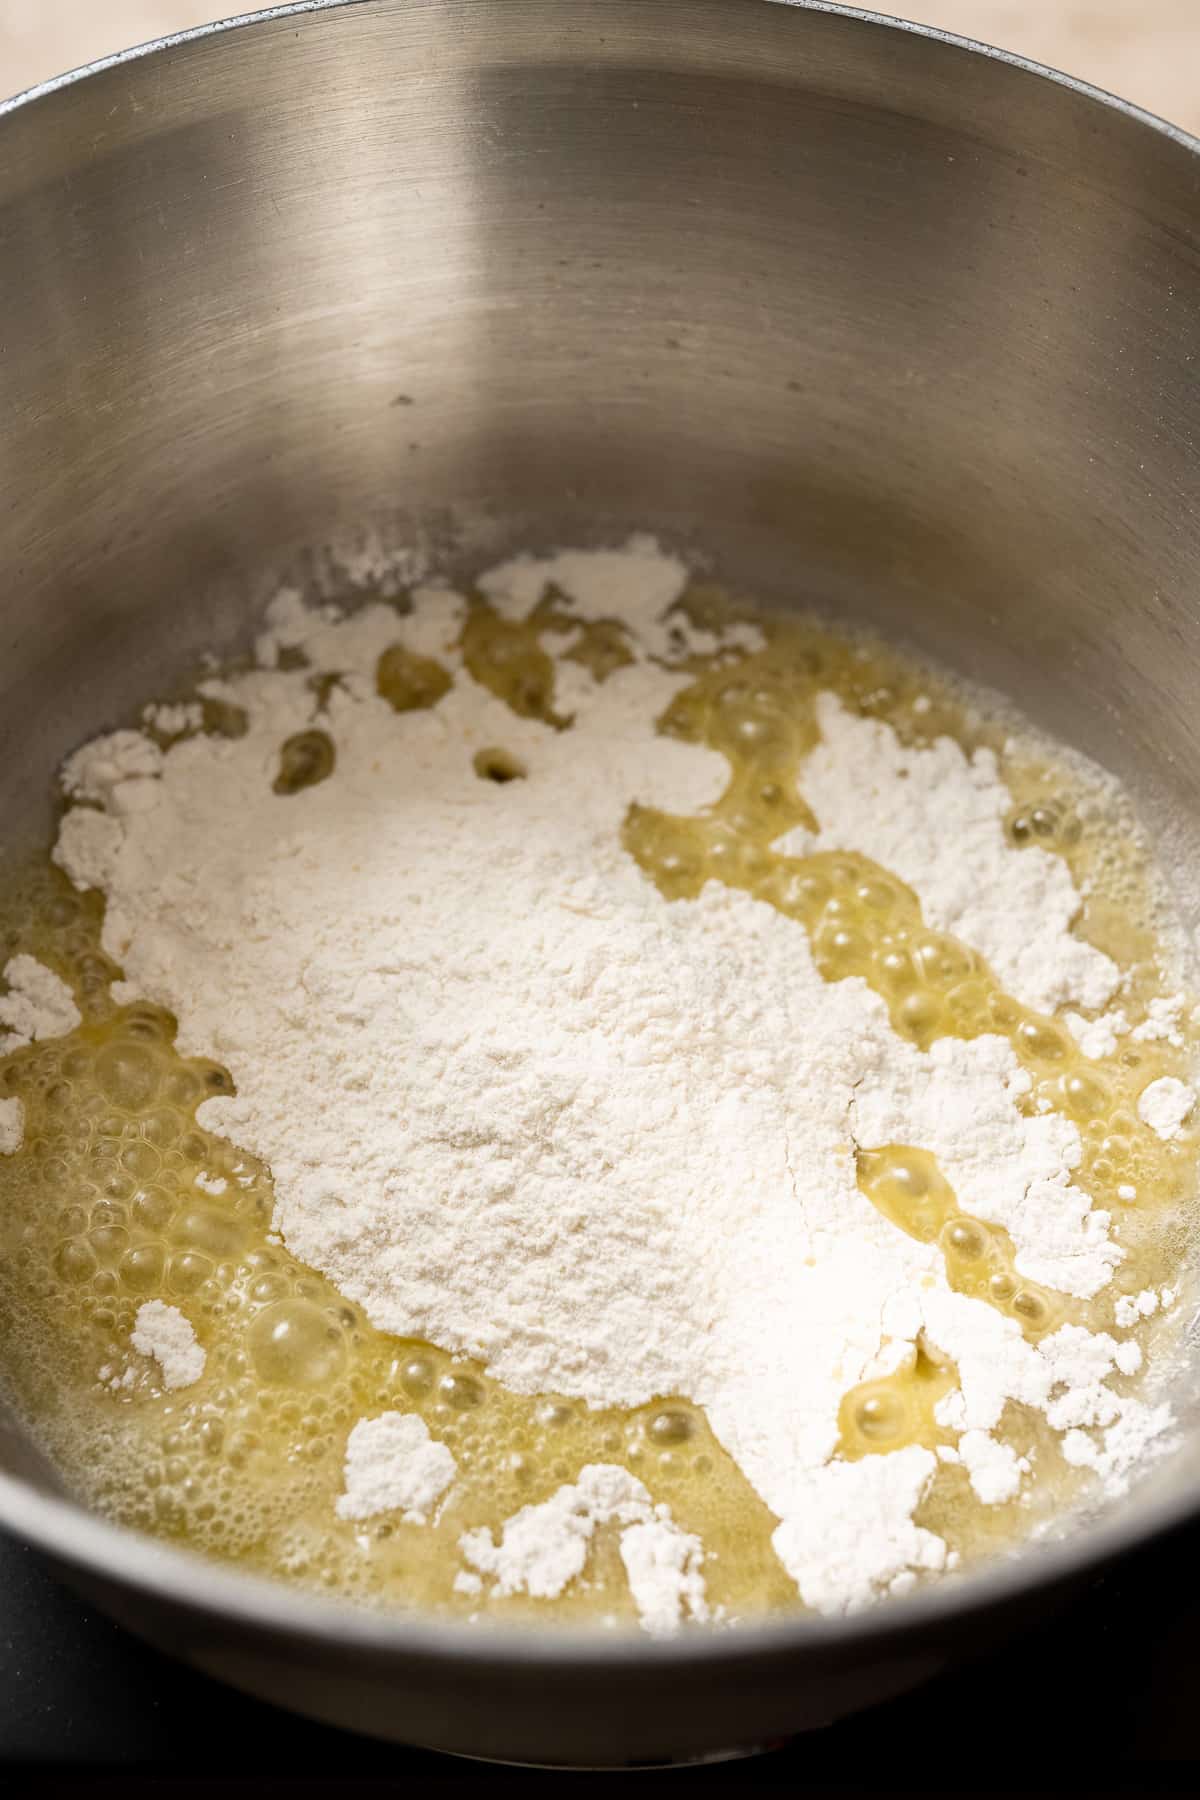 All-purpose flour being added to melted butter.